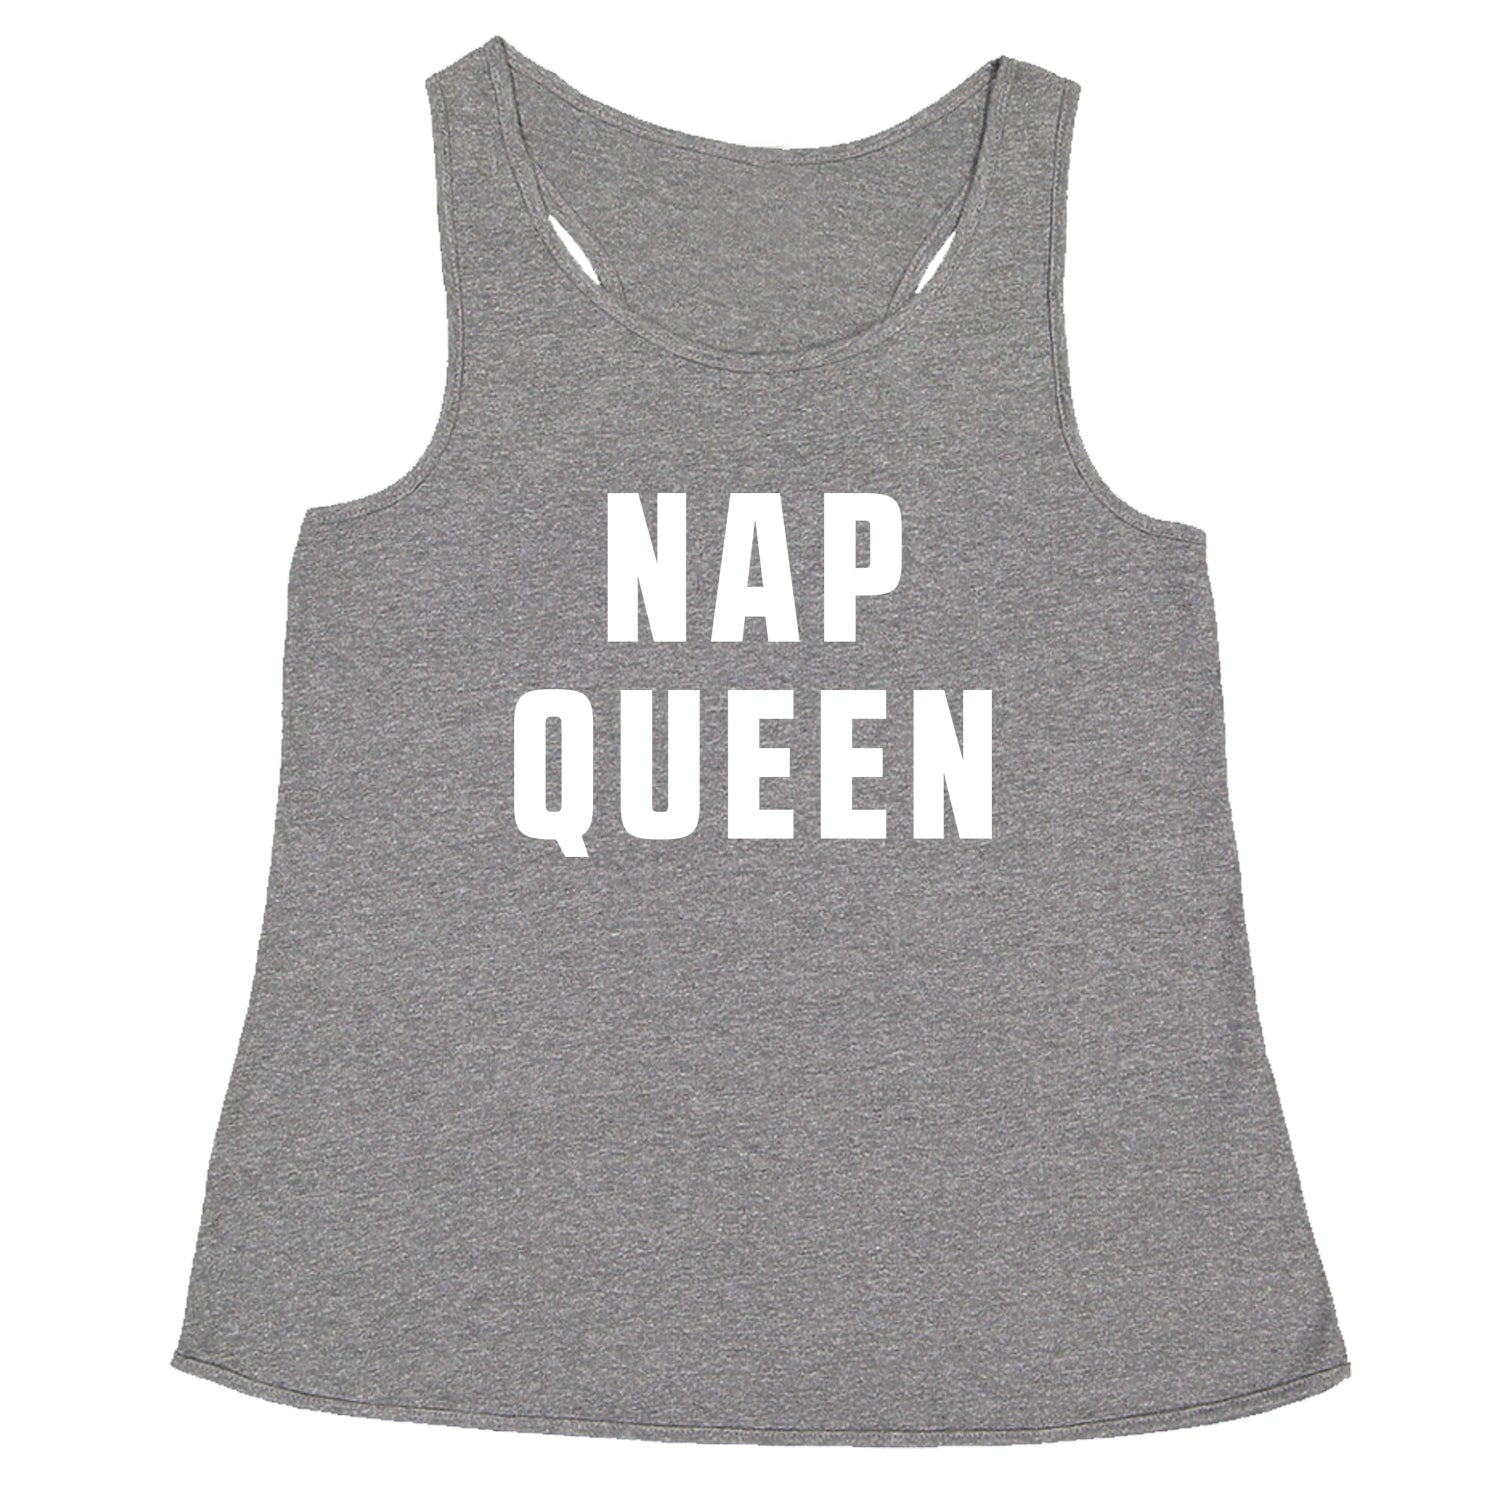 Nap Queen (White Print) Comfy Top For Lazy Days Racerback Tank Top for Women all, day, function, lazy, nap, pajamas, queen, siesta, sleep, tired, to, too by Expression Tees